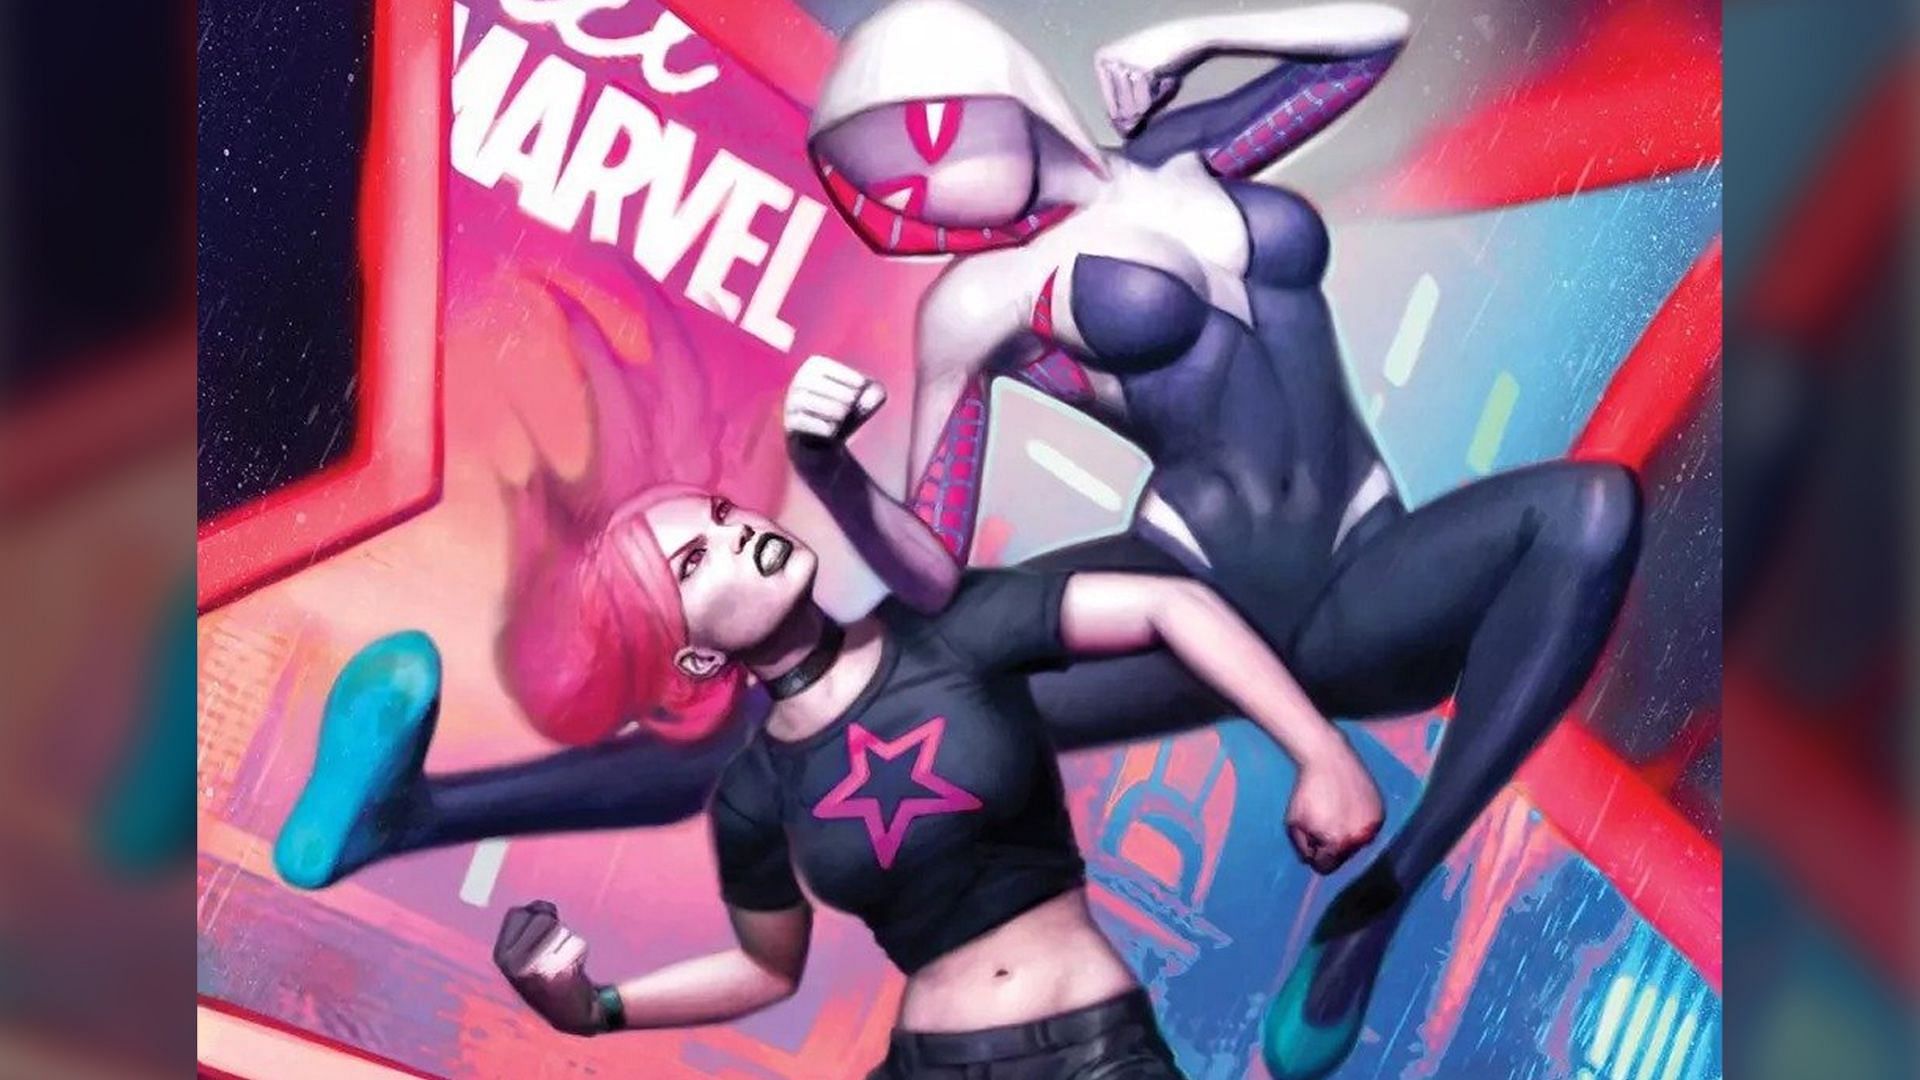 Most likely, Gwen Stacy will be added to the list of Marvel characters in Fortnite very soon. This character was shown in the new Fortnite x Marvel: Zero War #5 comics, which almost confirms that she will be added to the game.